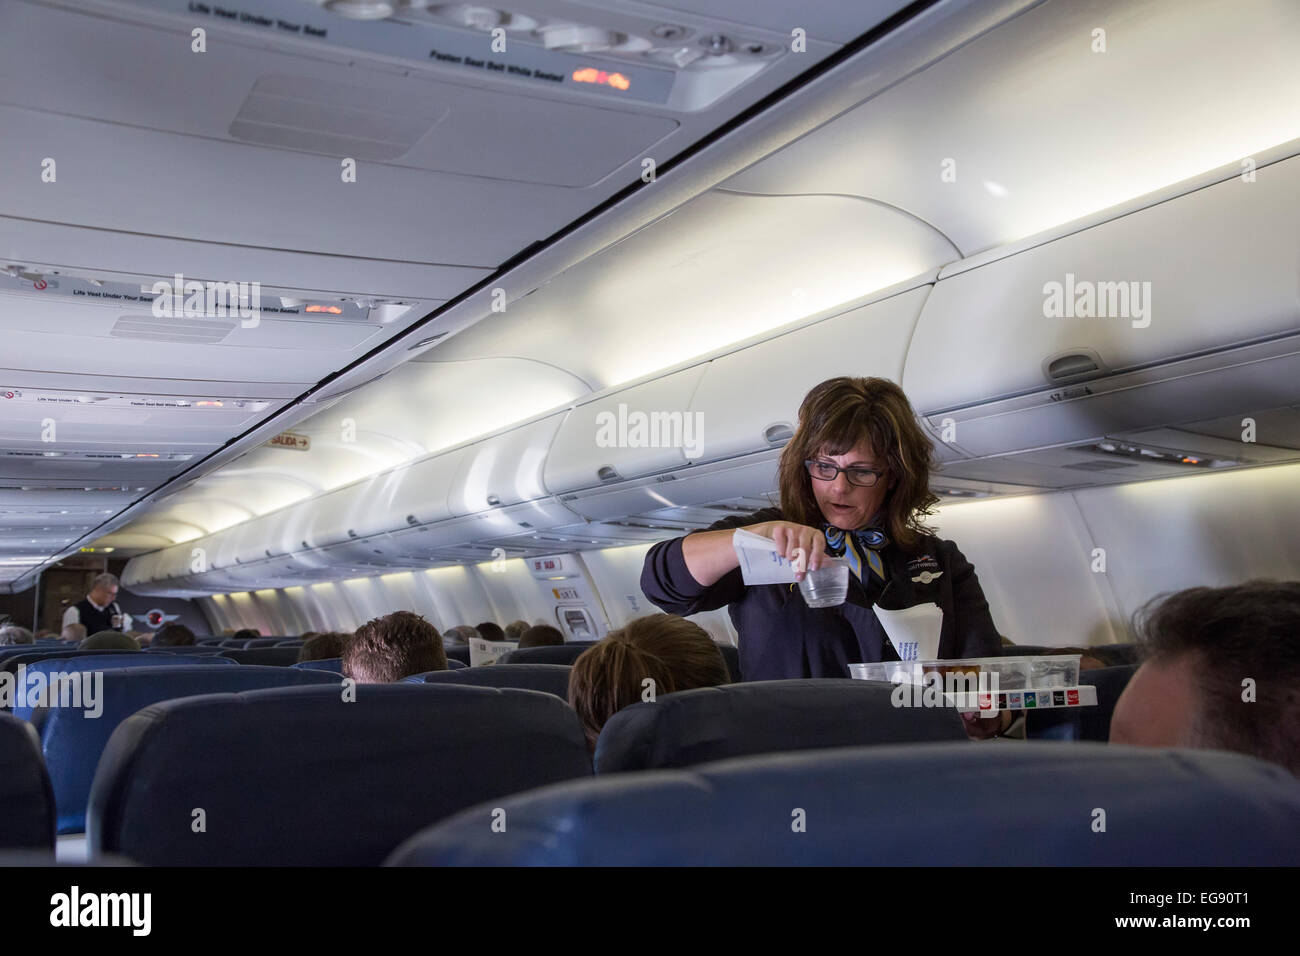 Chicago, Illinois - A Southwest Airlines flight attendant serves drinks to passengers on a flight to Denver. Stock Photo